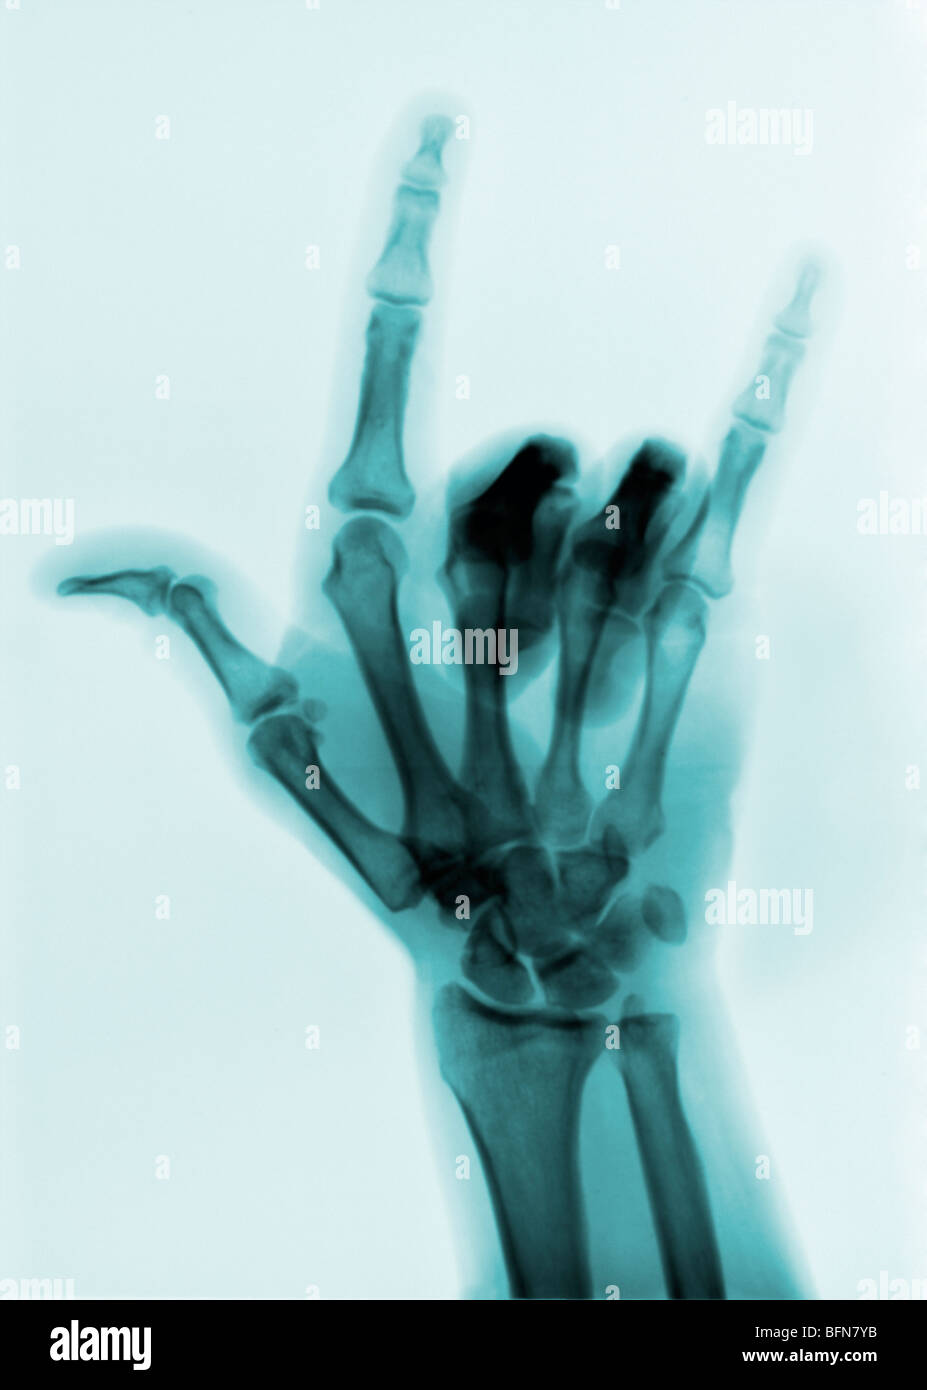 x-ray shoing sign language for 'I love you' Stock Photo